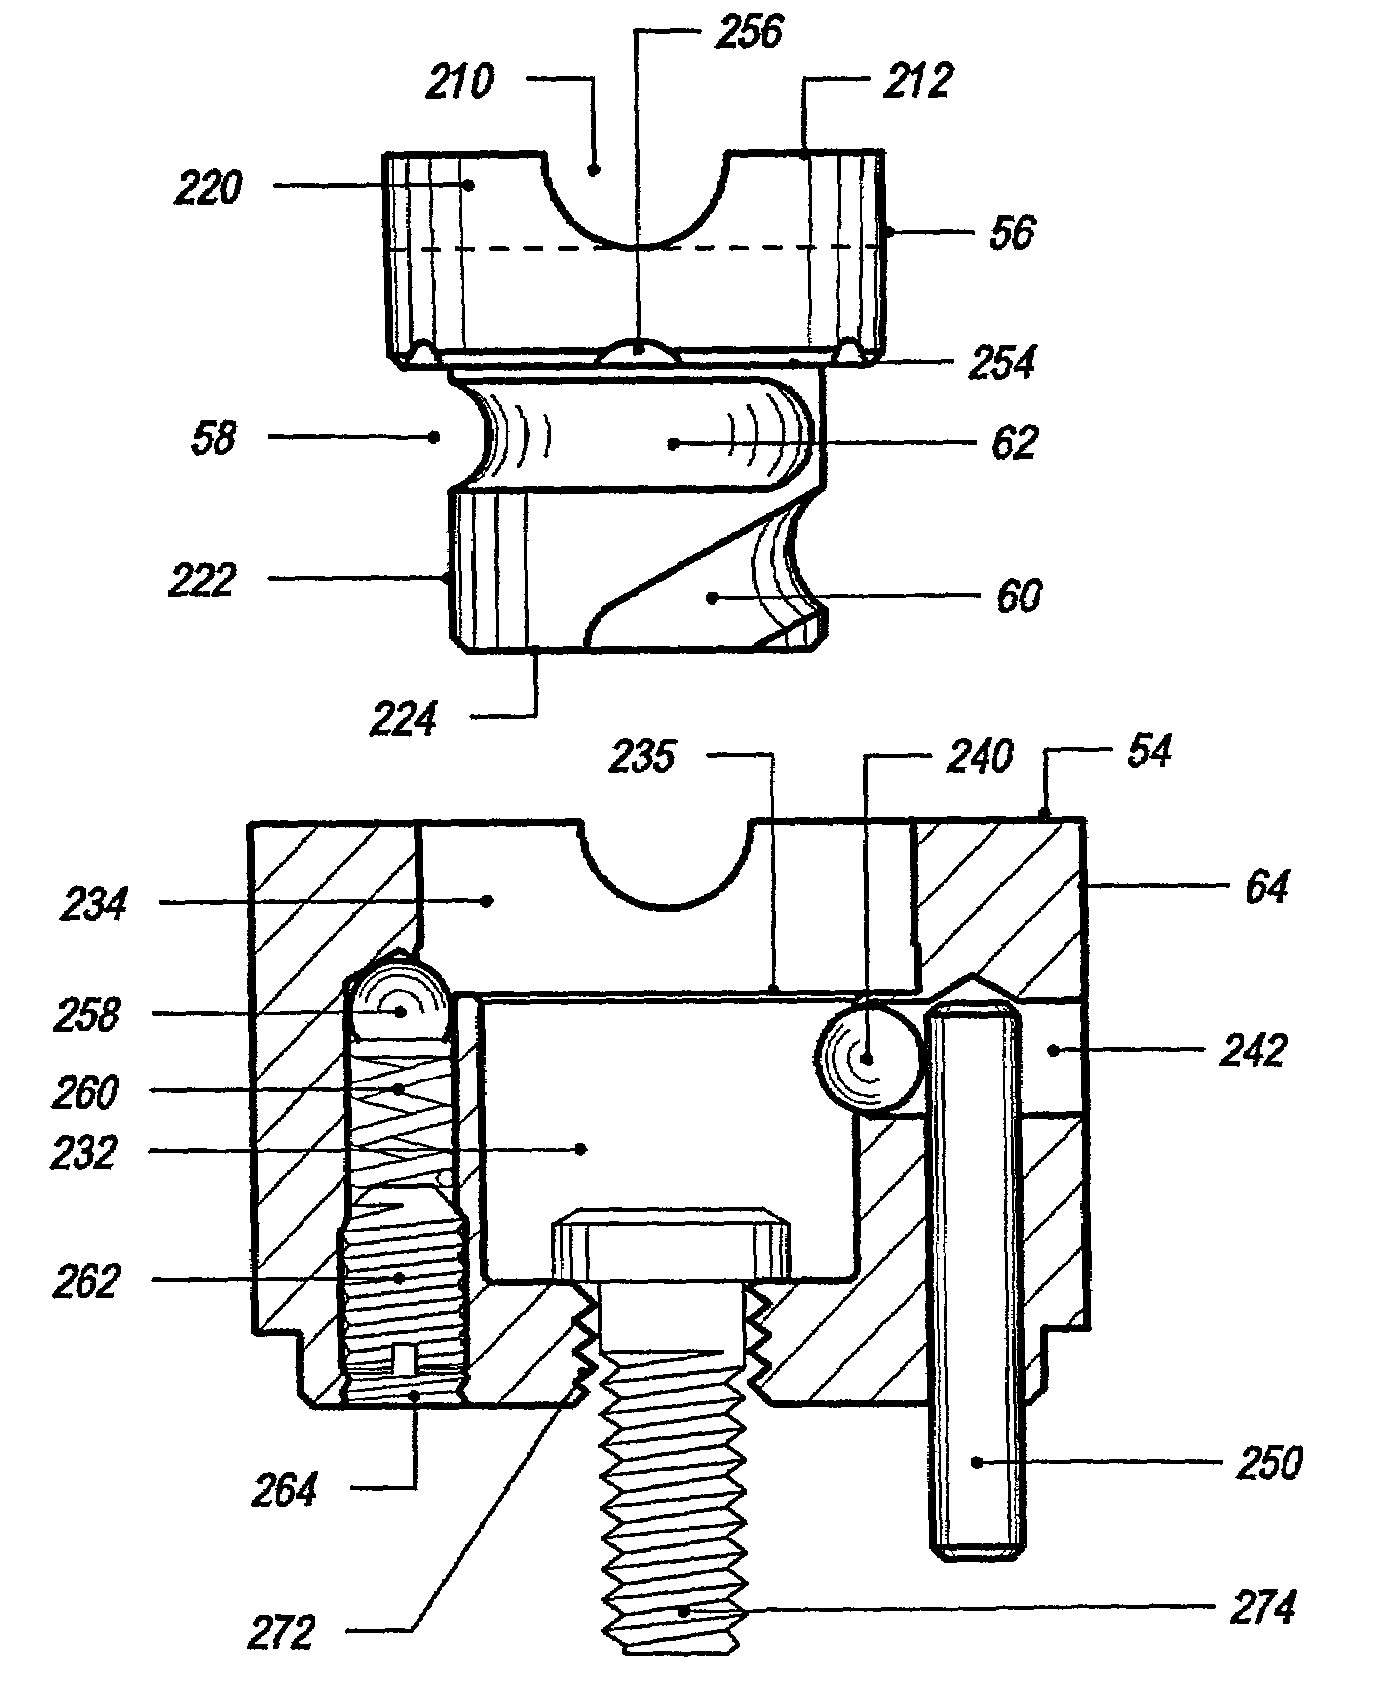 Ejector pin and method